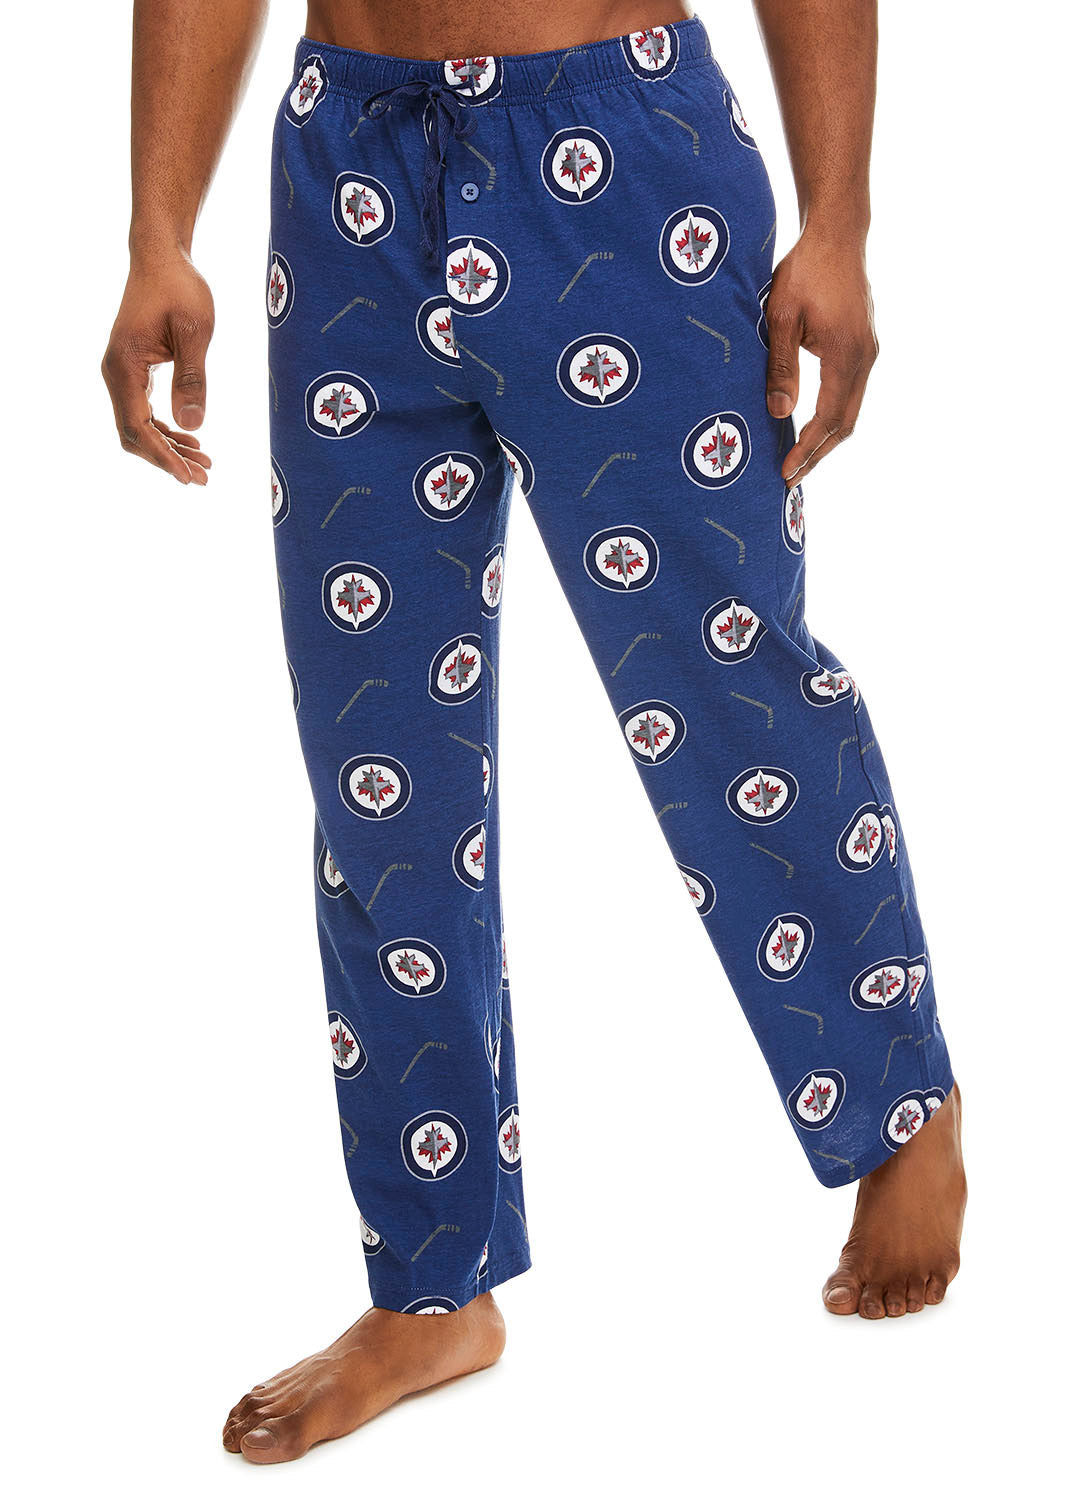 Front View Man wearing Winnipeg Jets Cotton Sleep Pant with logo and hockey stick print (Blue)